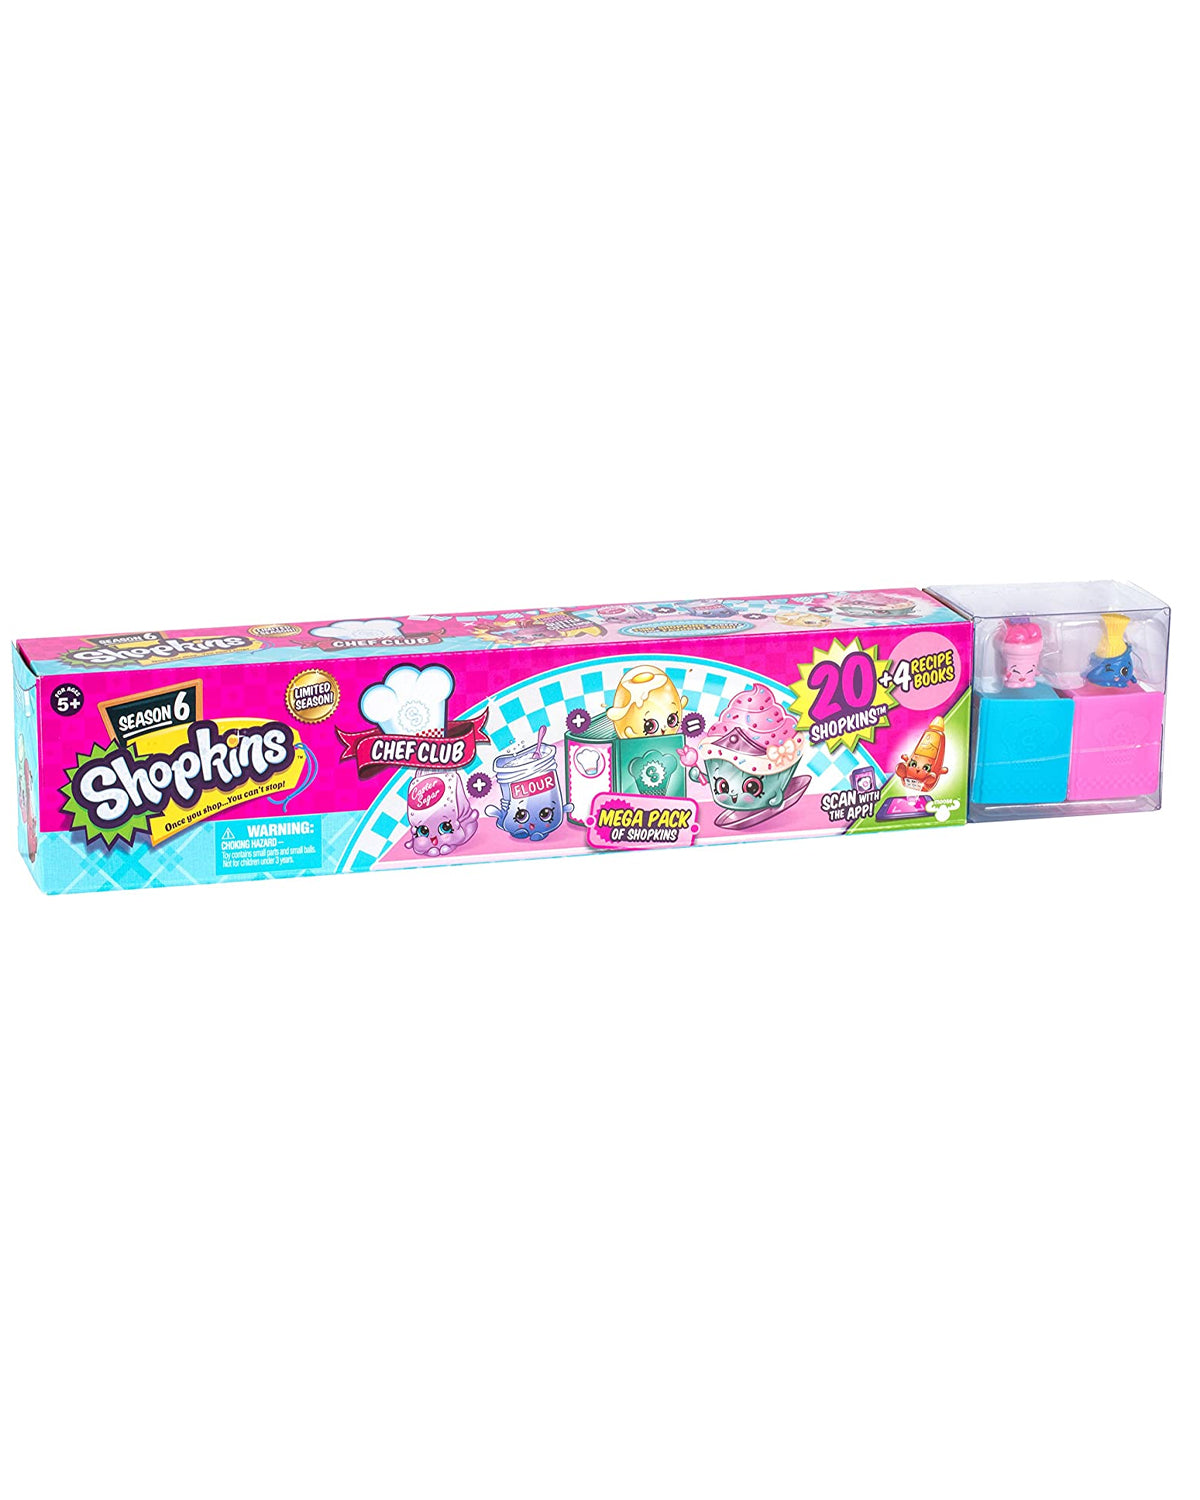 Shopkins Season 6 Chef Club Mega Pack Collectible Toy with Over 20 pcs